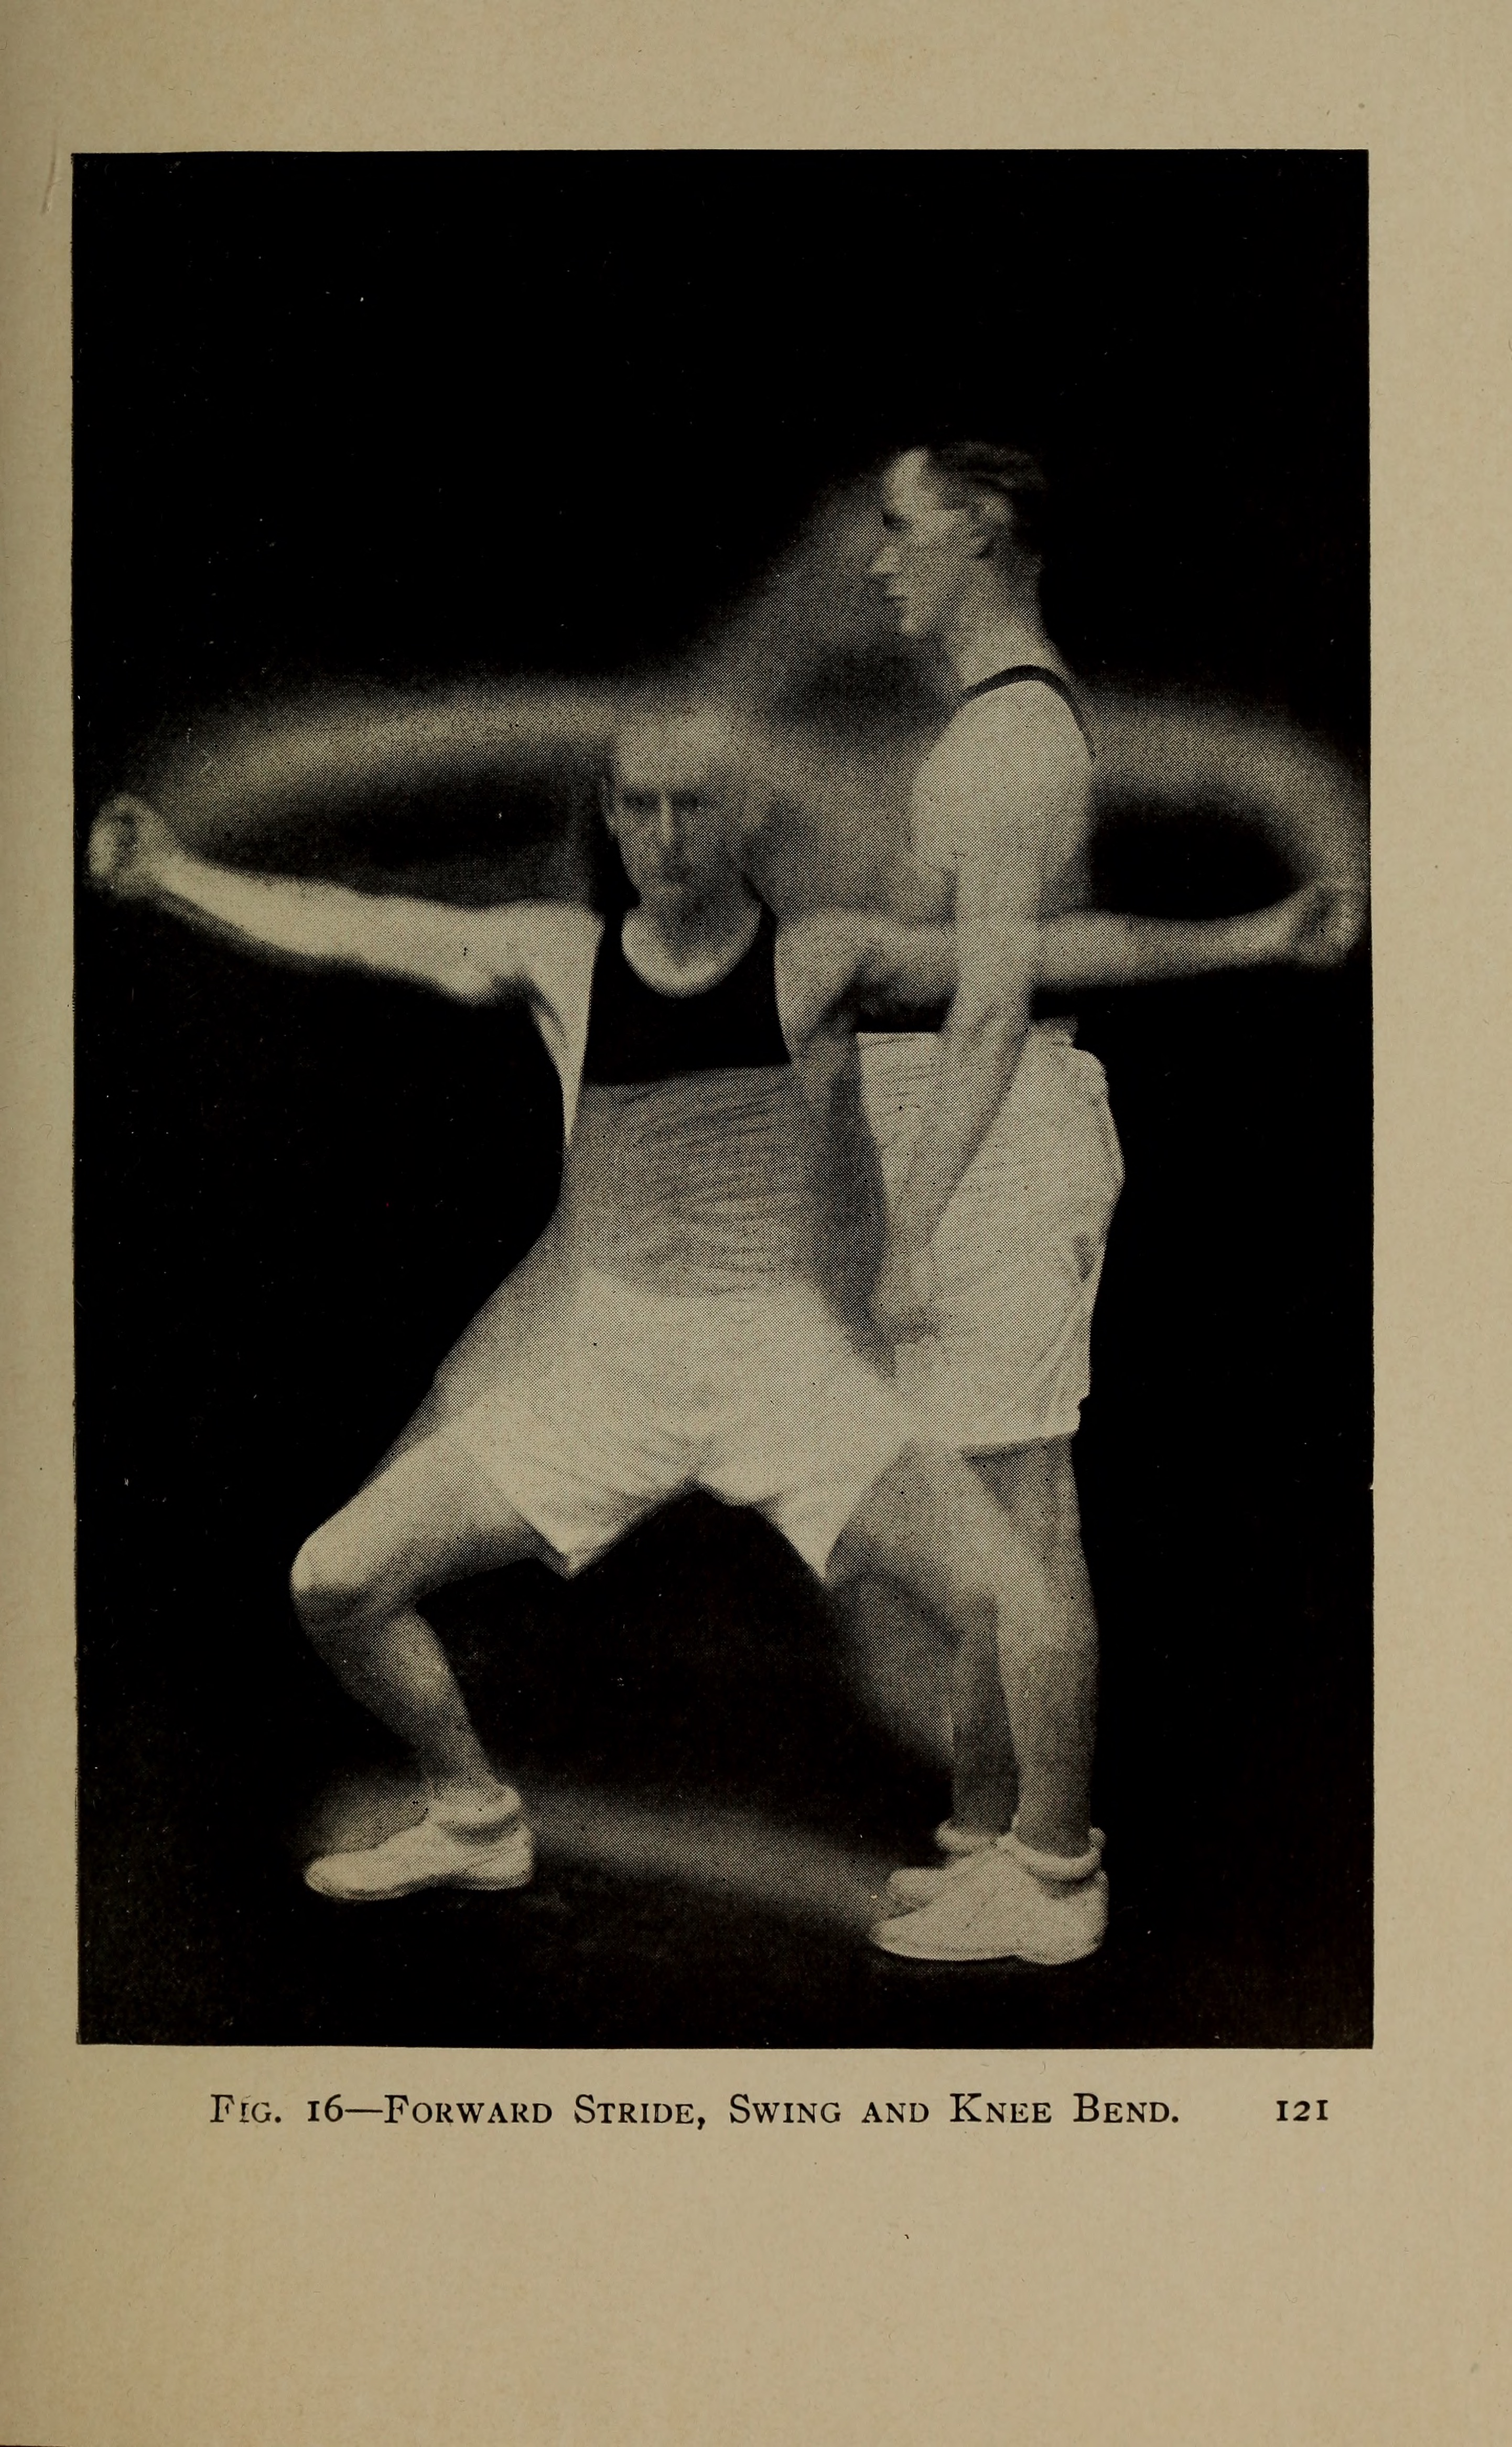 Physical training for business men; basic rules and simple exercises for gaining assured control of the physical self byHancock, Harrie Irving, 1868-1922 Publication date 1917